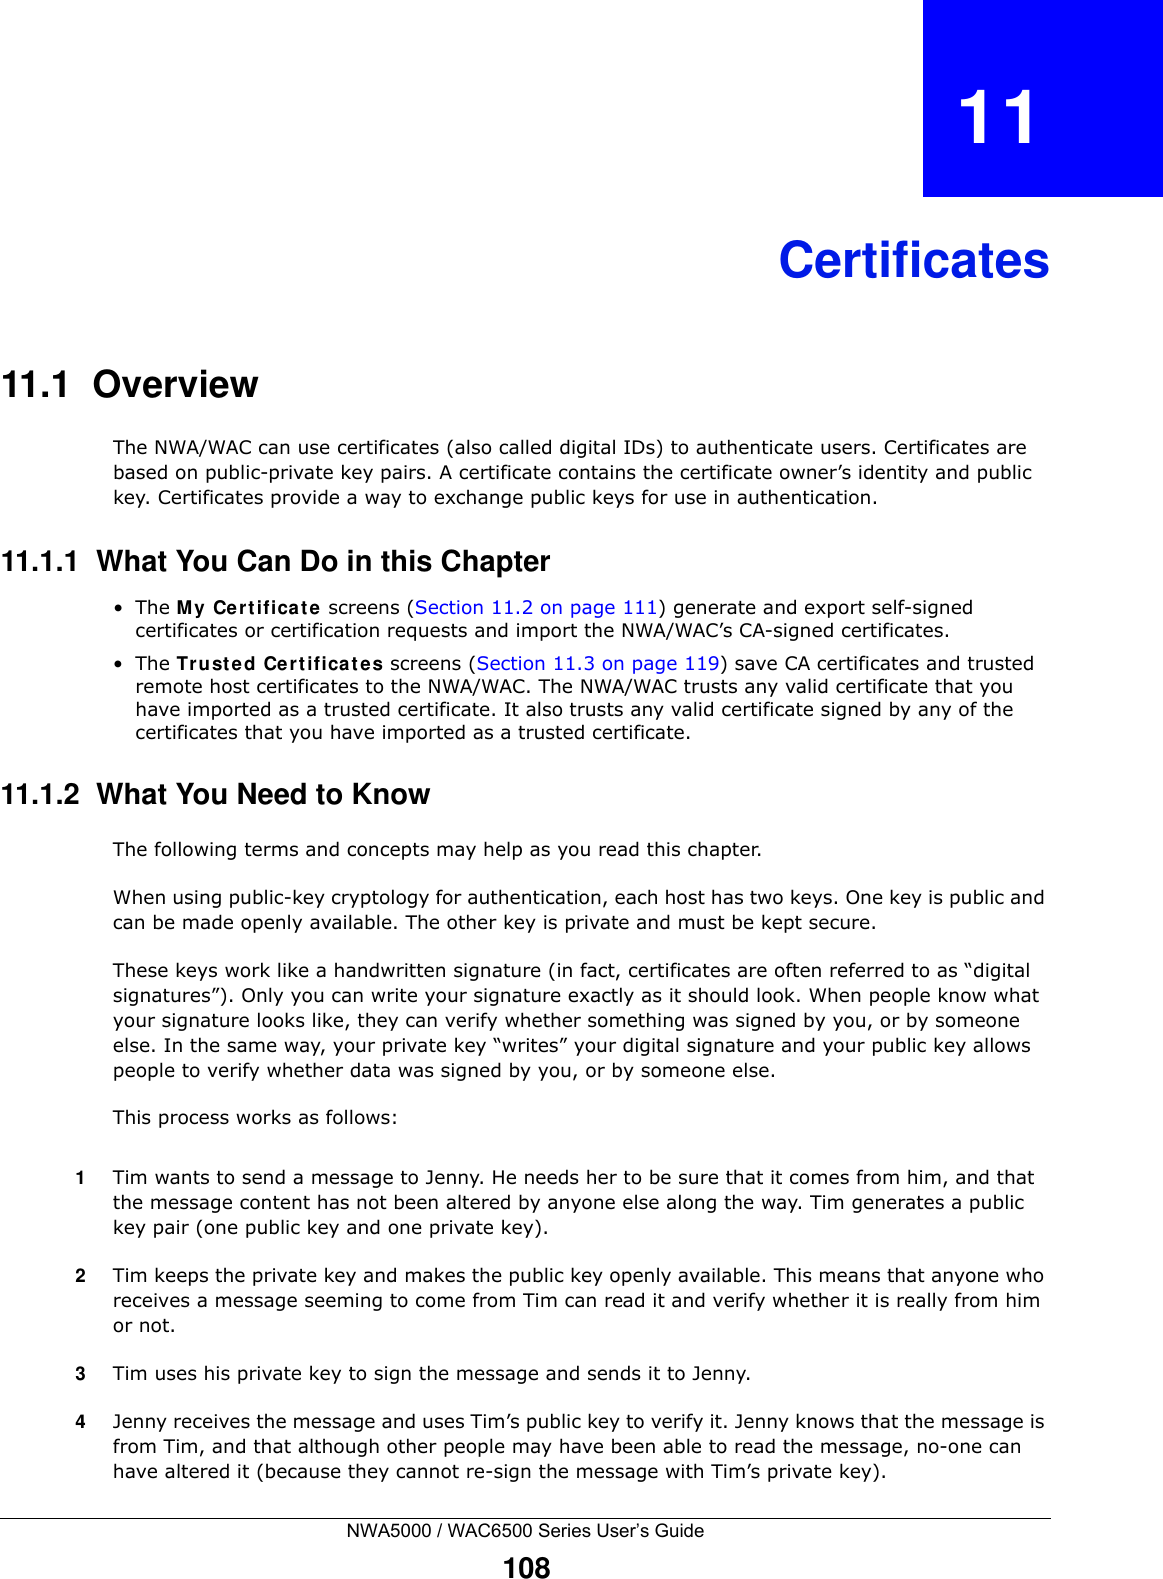 NWA5000 / WAC6500 Series User’s Guide108CHAPTER   11Certificates11.1  OverviewThe NWA/WAC can use certificates (also called digital IDs) to authenticate users. Certificates are based on public-private key pairs. A certificate contains the certificate owner’s identity and public key. Certificates provide a way to exchange public keys for use in authentication. 11.1.1  What You Can Do in this Chapter•The My Certifica te  screens (Section 11.2 on page 111) generate and export self-signed certificates or certification requests and import the NWA/WAC’s CA-signed certificates.•The Truste d Ce rt ificat es screens (Section 11.3 on page 119) save CA certificates and trusted remote host certificates to the NWA/WAC. The NWA/WAC trusts any valid certificate that you have imported as a trusted certificate. It also trusts any valid certificate signed by any of the certificates that you have imported as a trusted certificate. 11.1.2  What You Need to KnowThe following terms and concepts may help as you read this chapter.When using public-key cryptology for authentication, each host has two keys. One key is public and can be made openly available. The other key is private and must be kept secure. These keys work like a handwritten signature (in fact, certificates are often referred to as “digital signatures”). Only you can write your signature exactly as it should look. When people know what your signature looks like, they can verify whether something was signed by you, or by someone else. In the same way, your private key “writes” your digital signature and your public key allows people to verify whether data was signed by you, or by someone else. This process works as follows:1Tim wants to send a message to Jenny. He needs her to be sure that it comes from him, and that the message content has not been altered by anyone else along the way. Tim generates a public key pair (one public key and one private key). 2Tim keeps the private key and makes the public key openly available. This means that anyone who receives a message seeming to come from Tim can read it and verify whether it is really from him or not. 3Tim uses his private key to sign the message and sends it to Jenny.4Jenny receives the message and uses Tim’s public key to verify it. Jenny knows that the message is from Tim, and that although other people may have been able to read the message, no-one can have altered it (because they cannot re-sign the message with Tim’s private key).